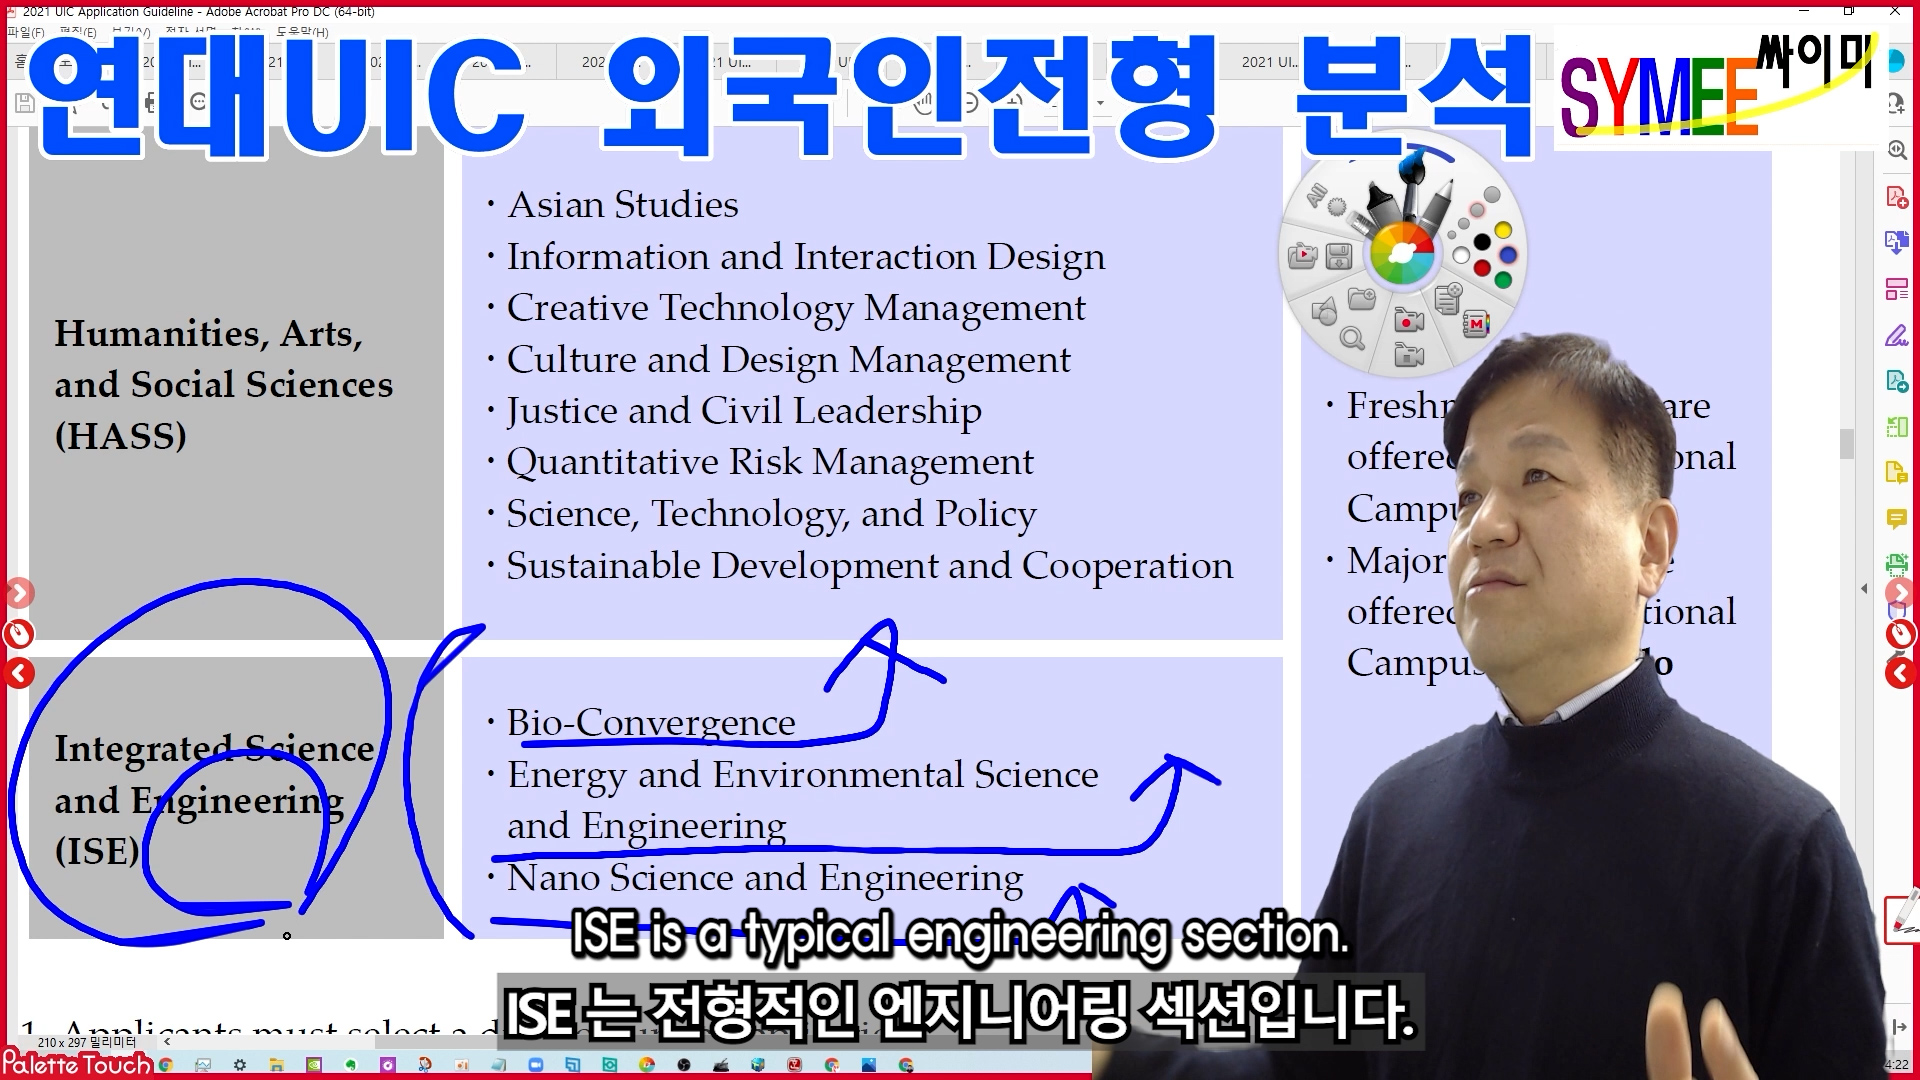 Yonsei Univ. Admission for UIC for Foreign Student 05 Majors.00_06_24_17.스틸 010.jpg